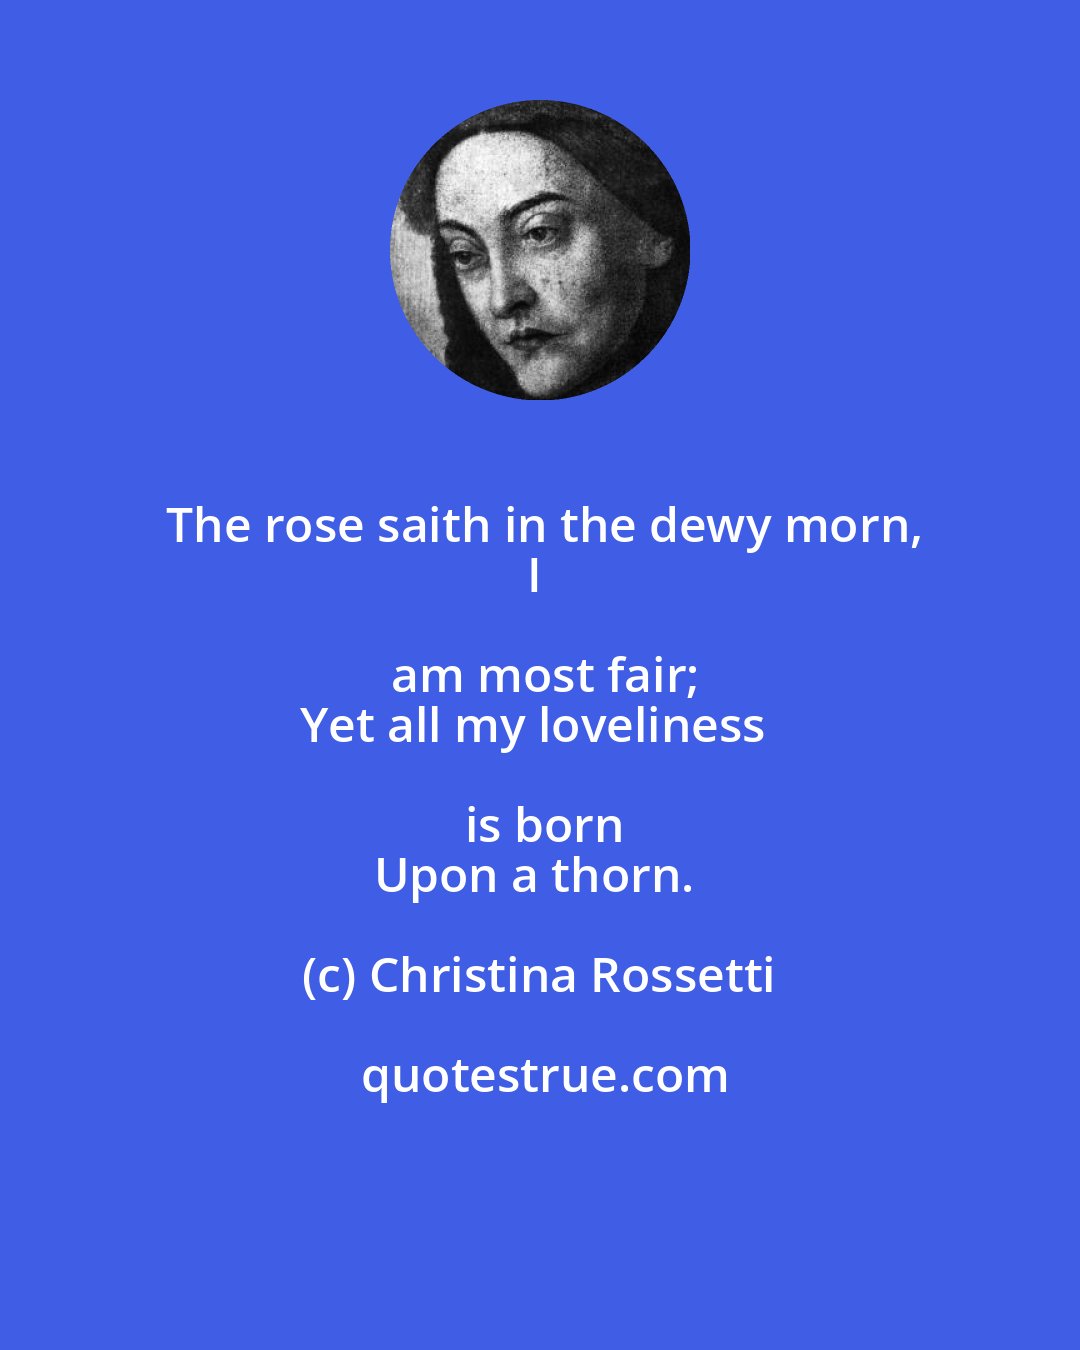 Christina Rossetti: The rose saith in the dewy morn,
I am most fair;
Yet all my loveliness is born
Upon a thorn.